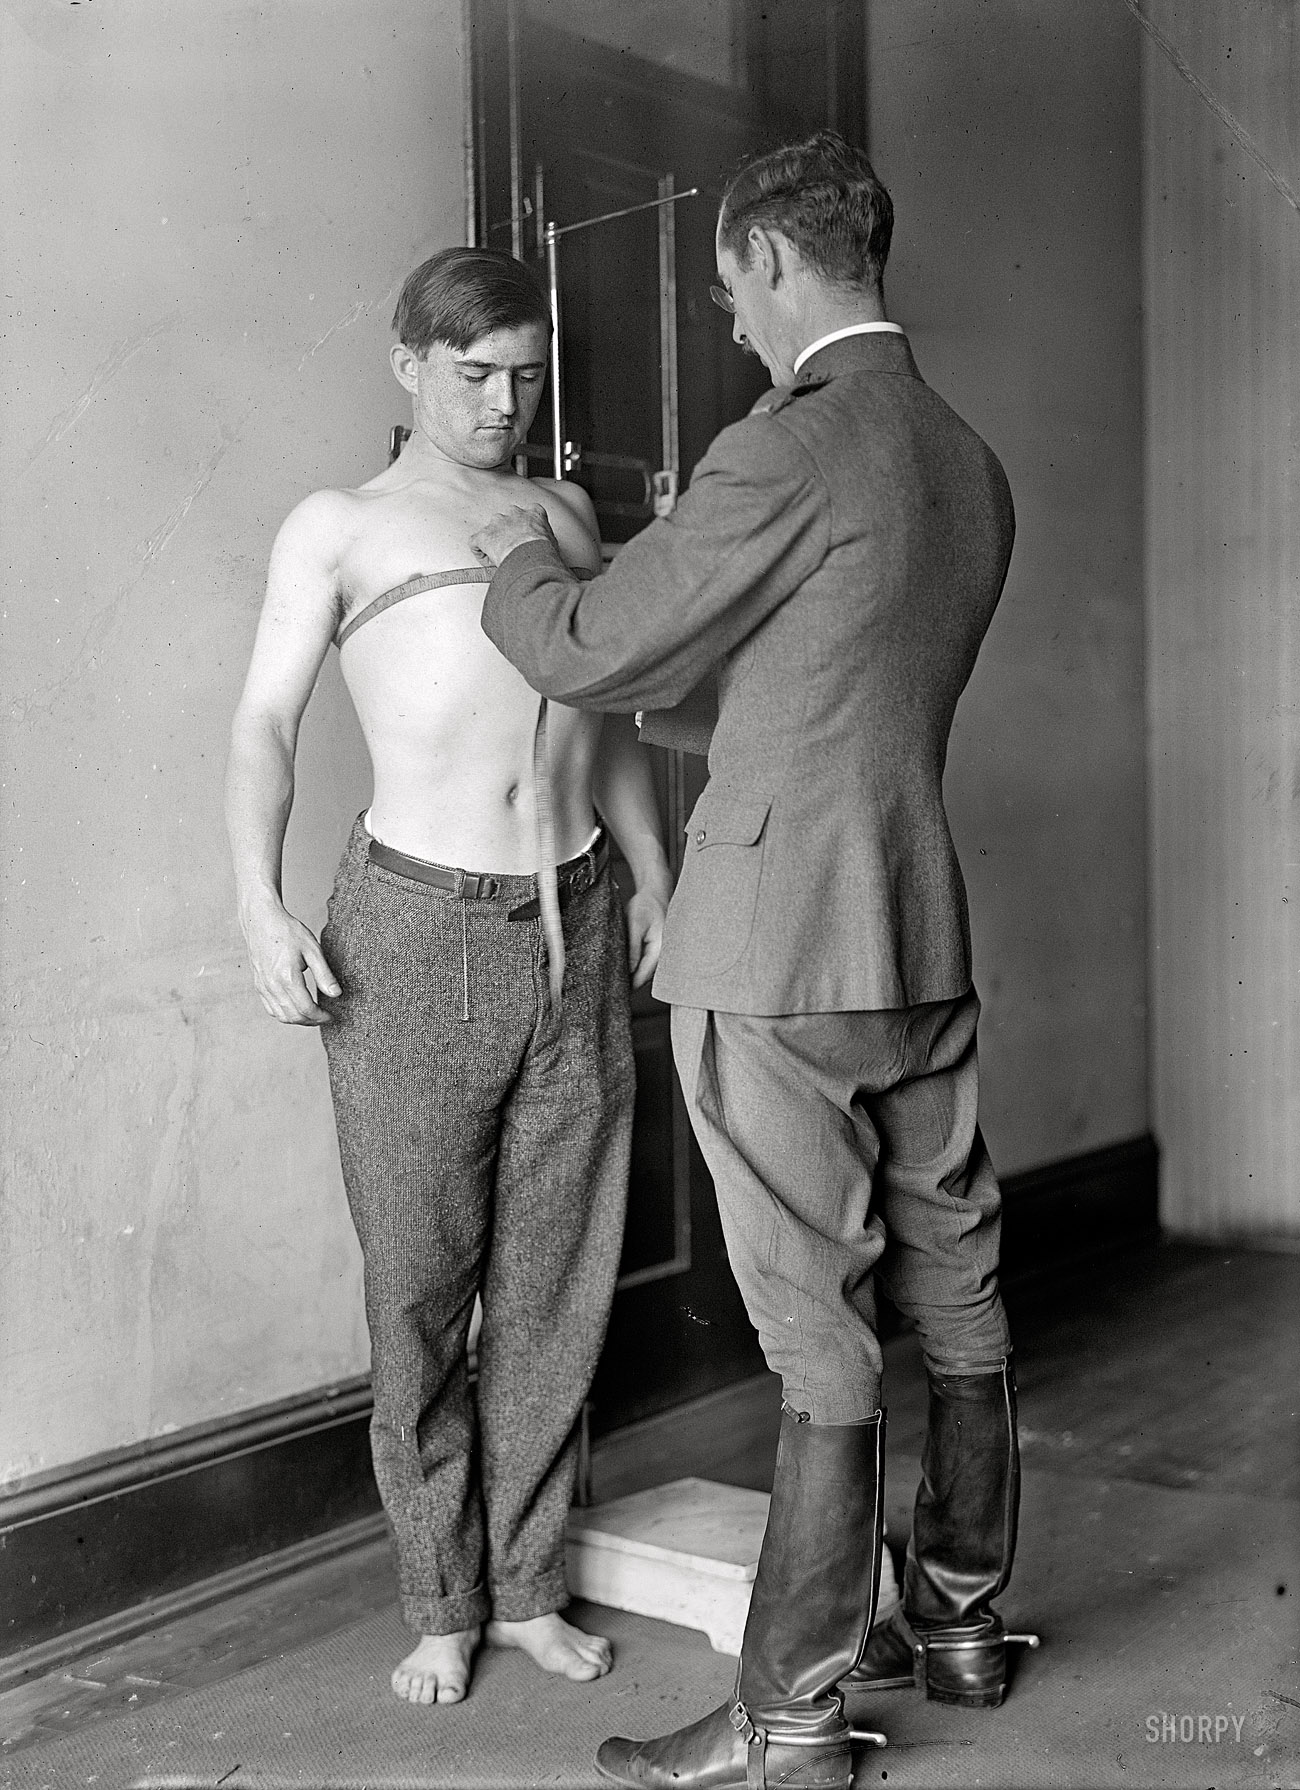 1917. "U.S. Army. Physical examination." Our second look at this young man's initiation into the Army. Harris & Ewing glass negative. View full size.